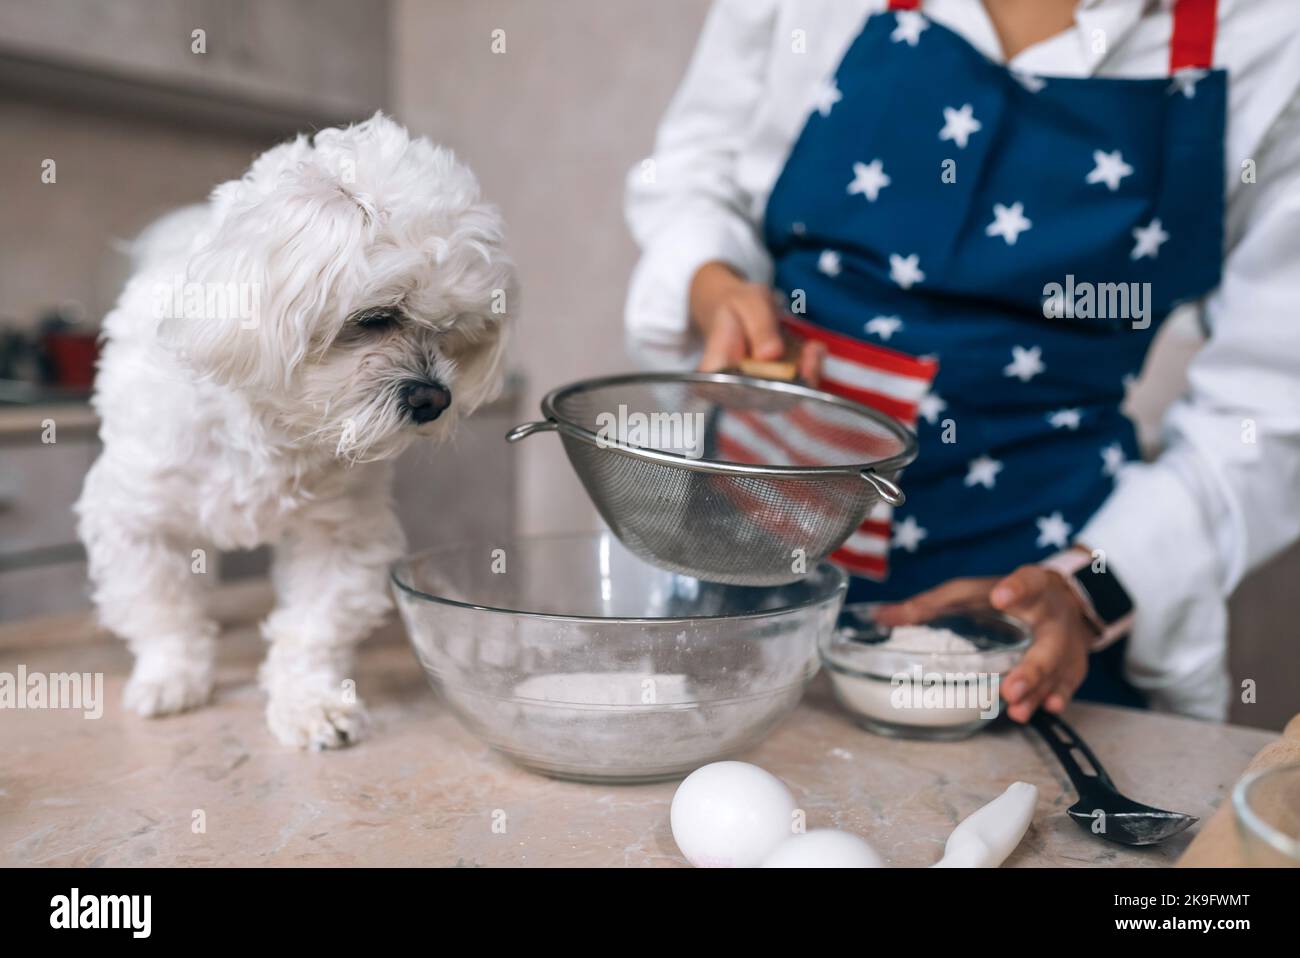 Woman in the kitchen sifts flour together with a dog Stock Photo